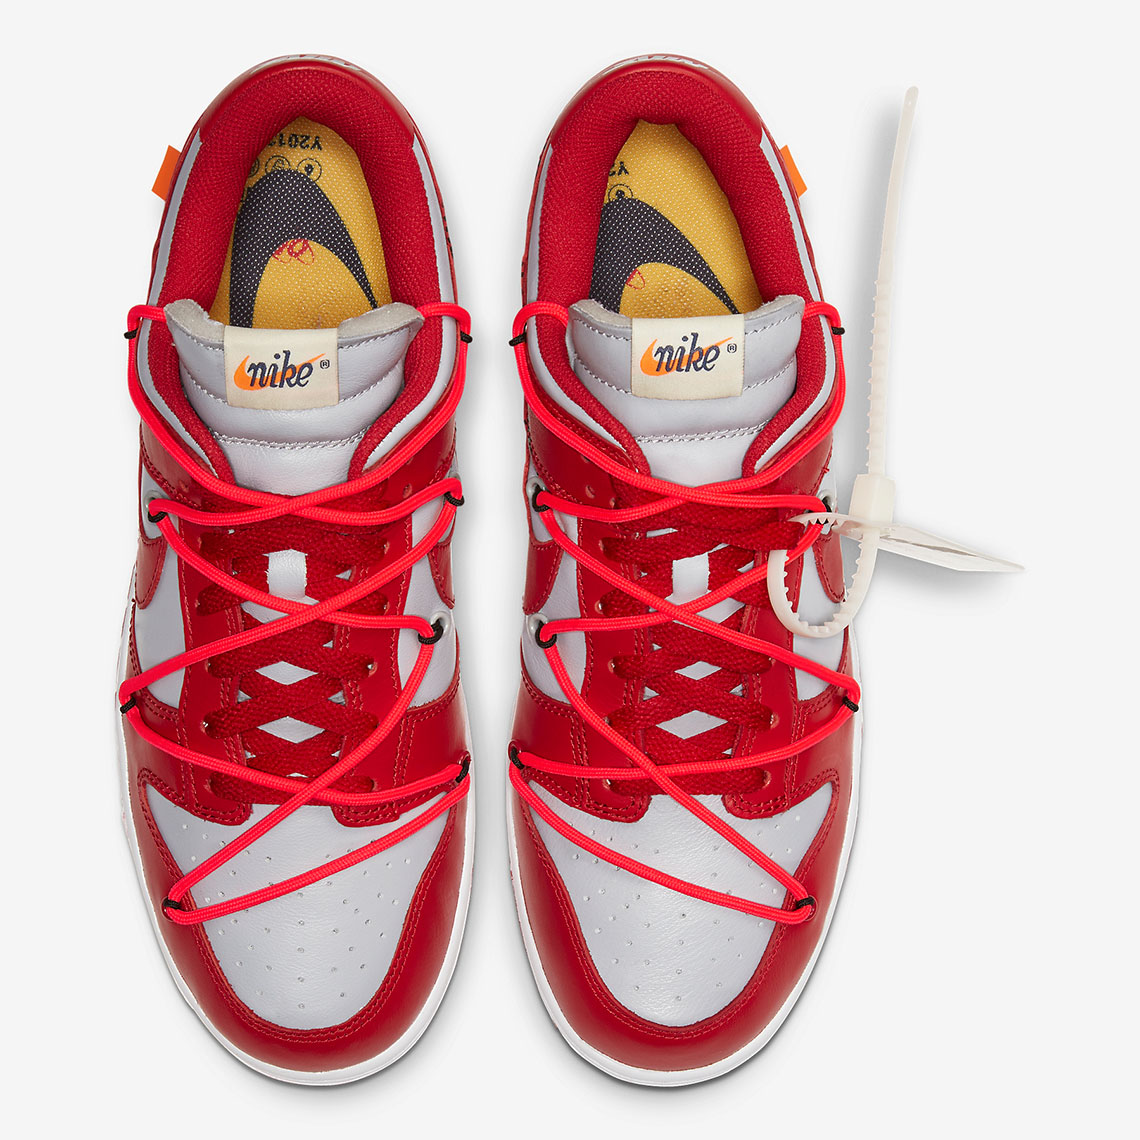 Off-White Nike Dunk Release Date | SneakerNews.com